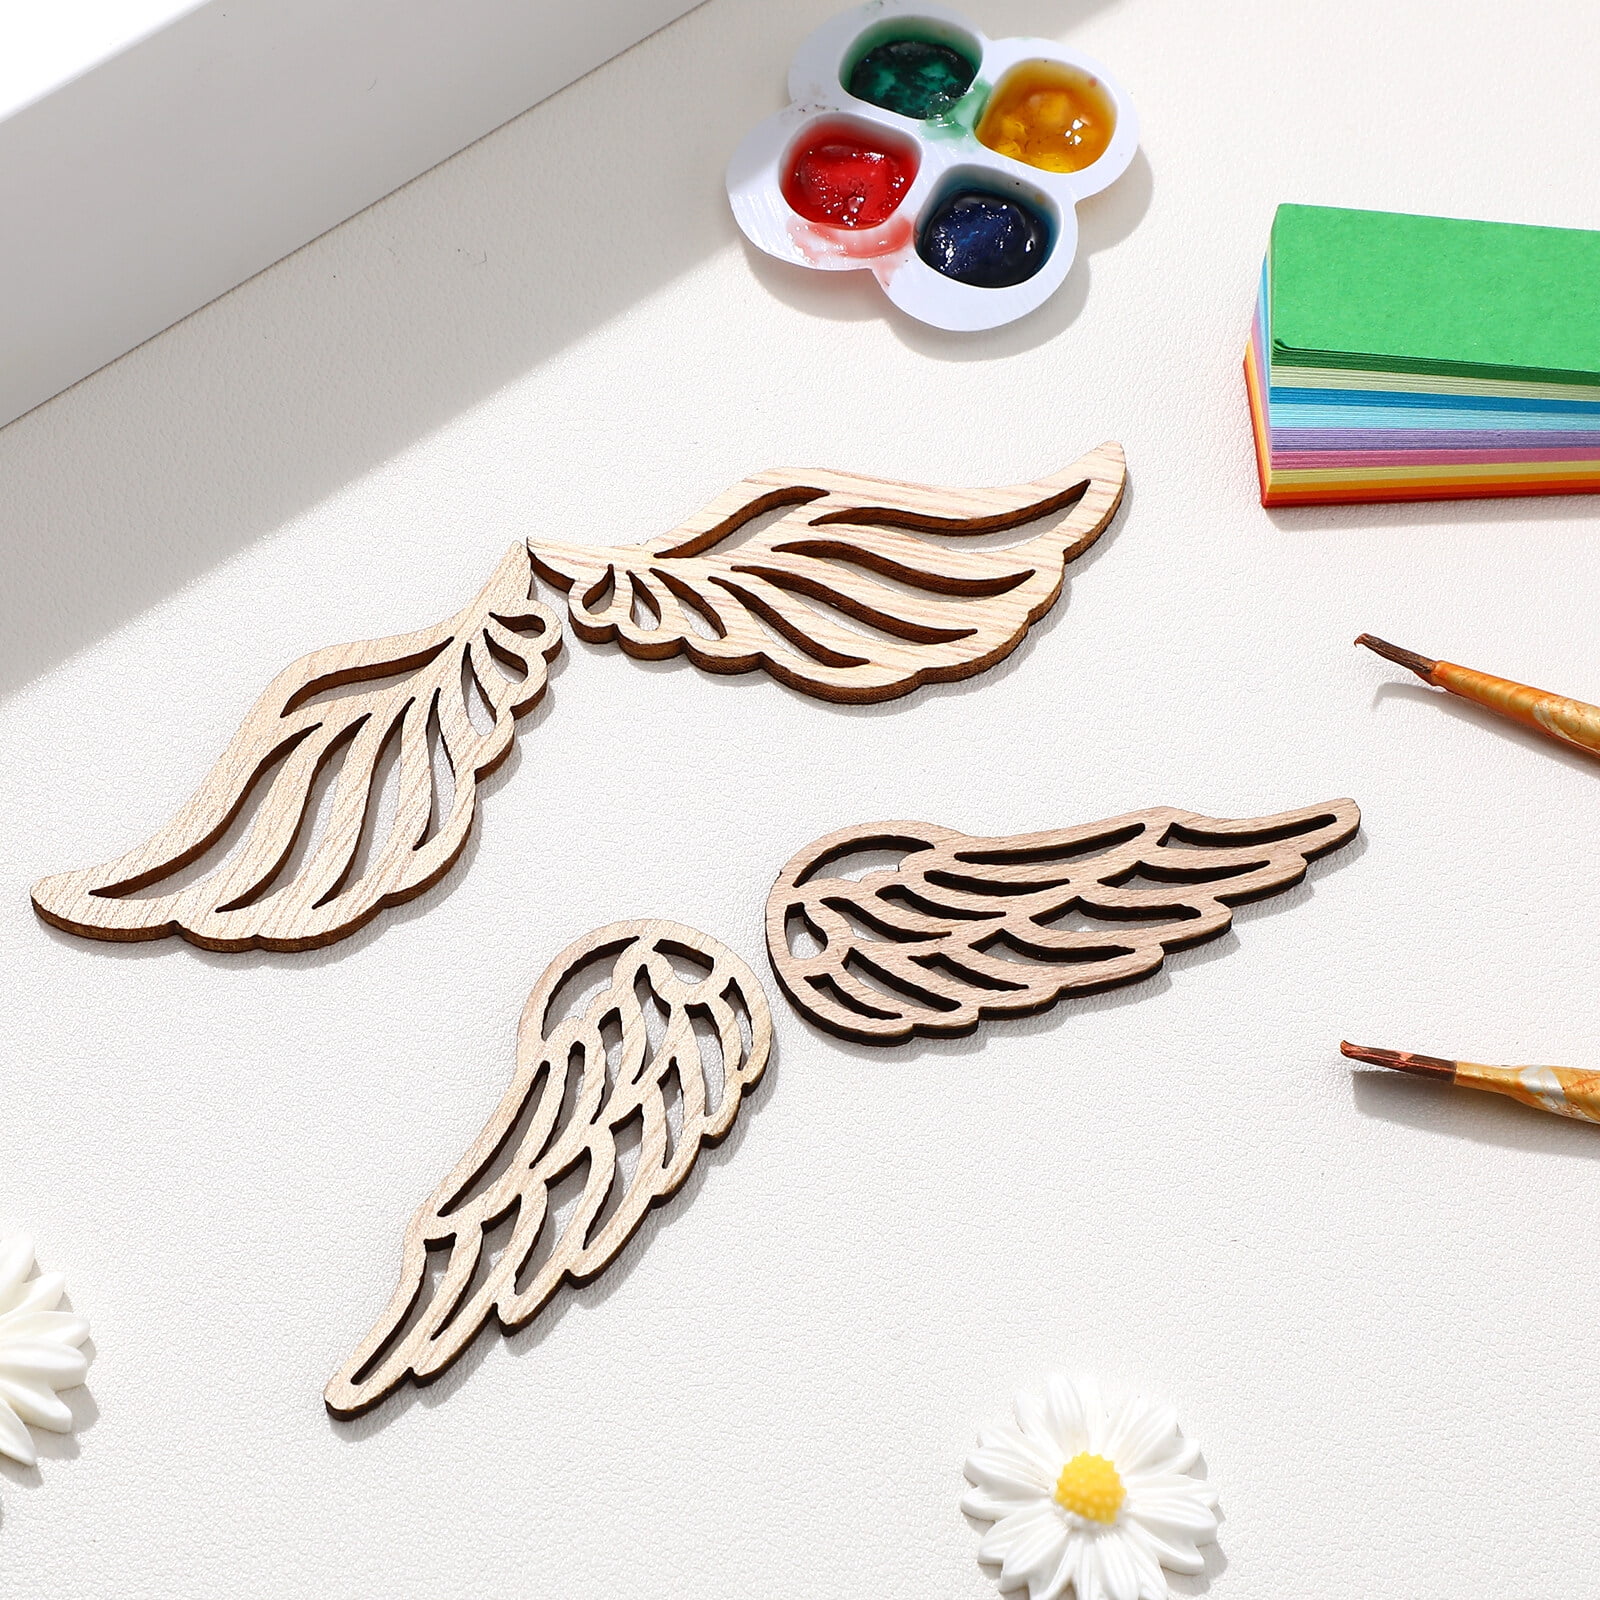 80pcs Angel Wings Wooden Patches Adorable No Hole Wood Chips